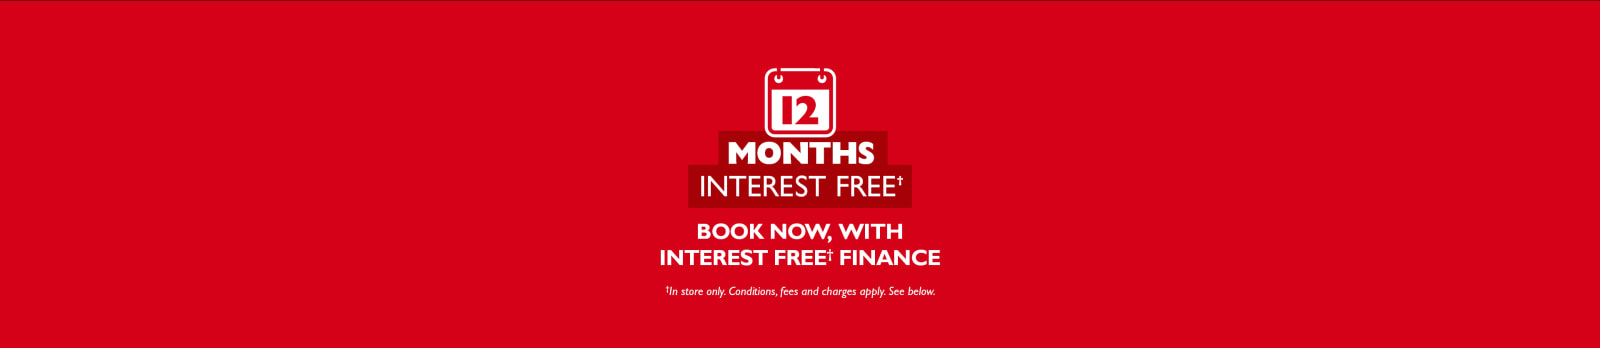 12 months interest free* book now, with interest free* finance. *Conditions, fees and charges apply. See below.